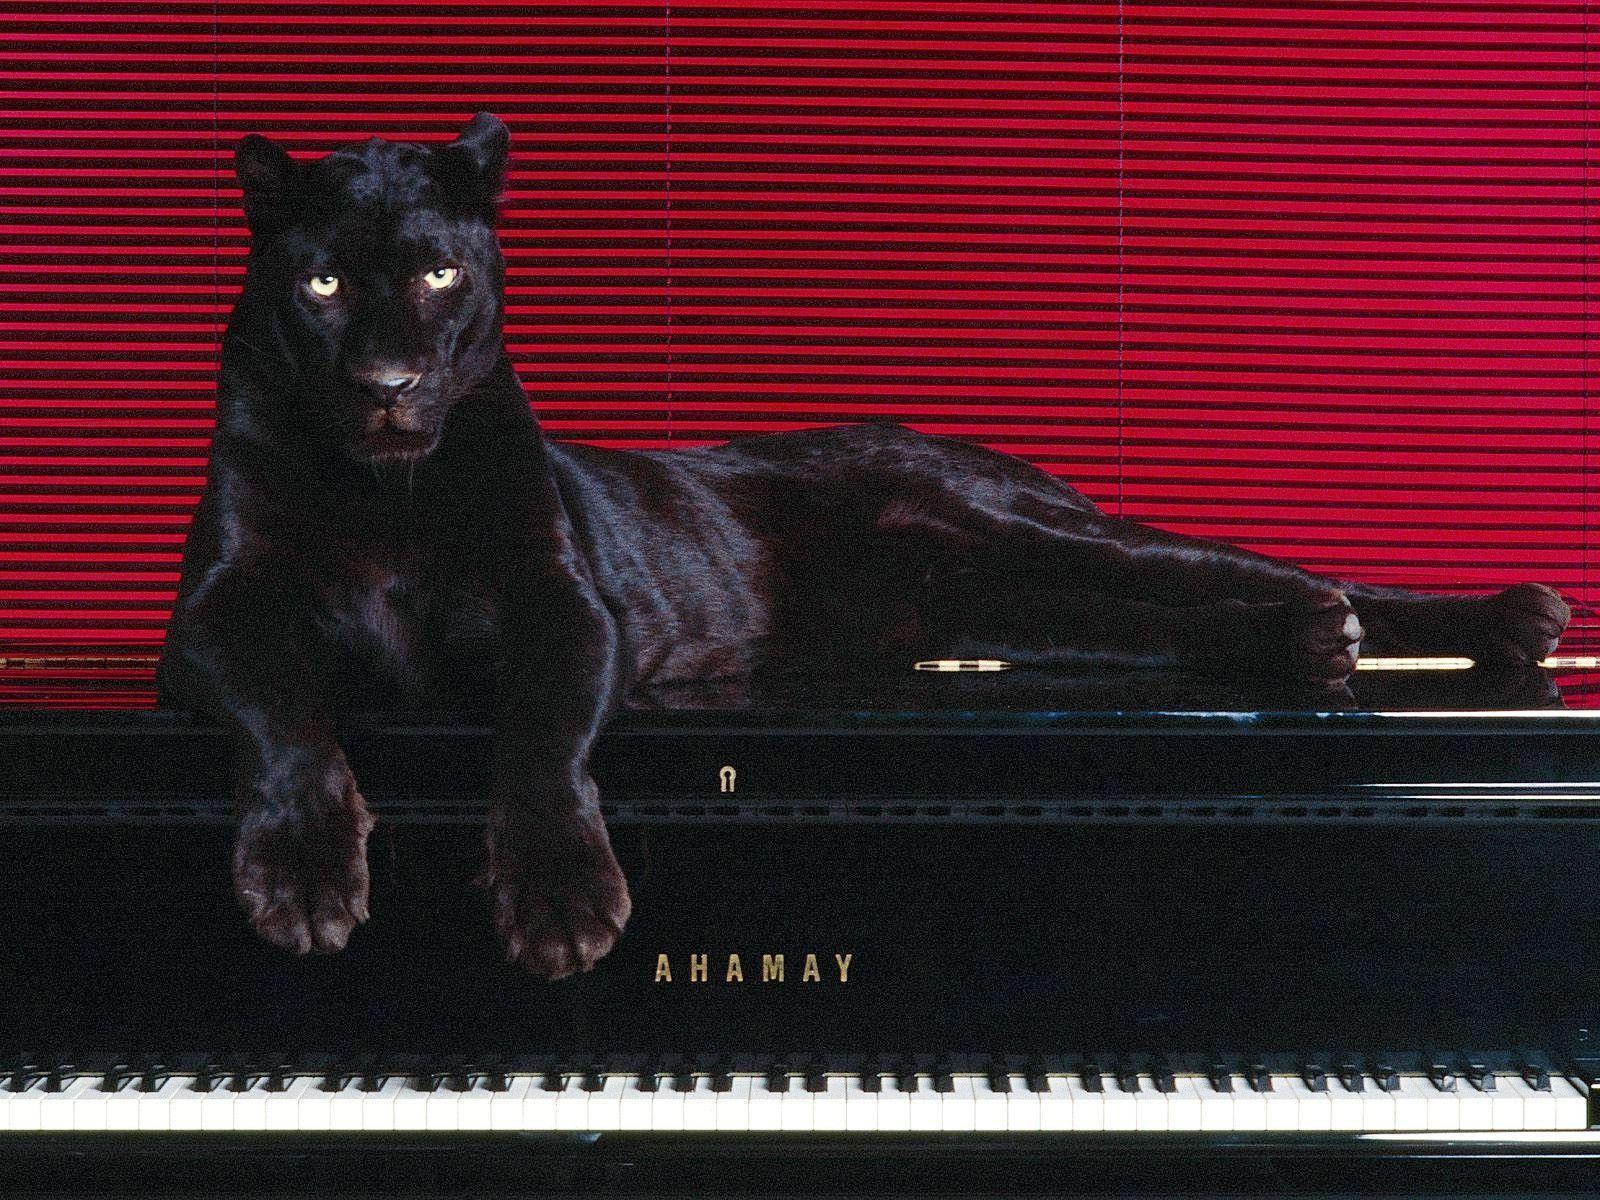 Black Leopard Sitting Down on Piano Table Wallpaper and Photo